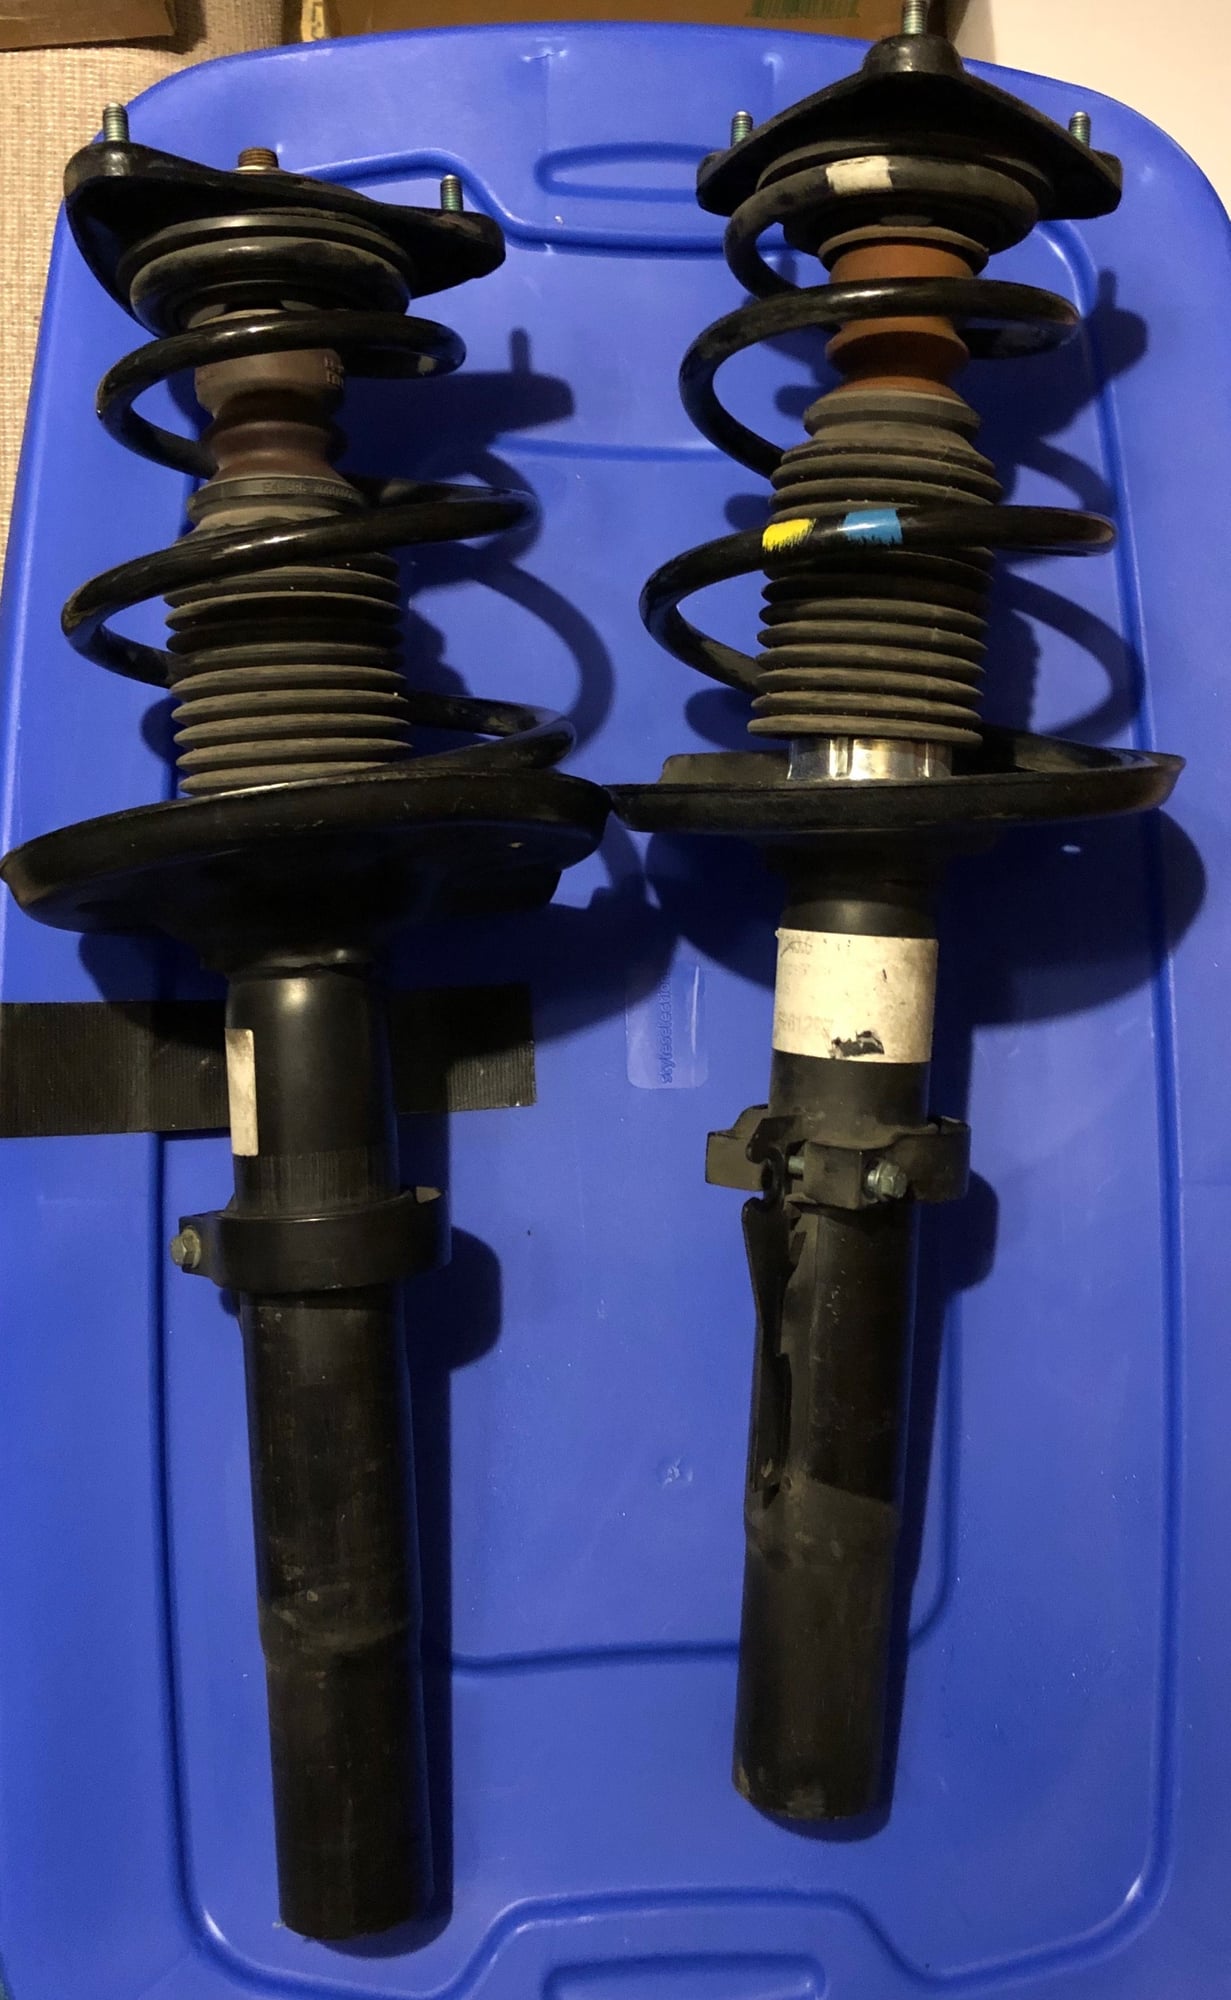 Steering/Suspension - 987.1S OEM Springs/Dampers - Used - 2006 to 2008 Porsche Cayman - Charleston, SC 29405, United States